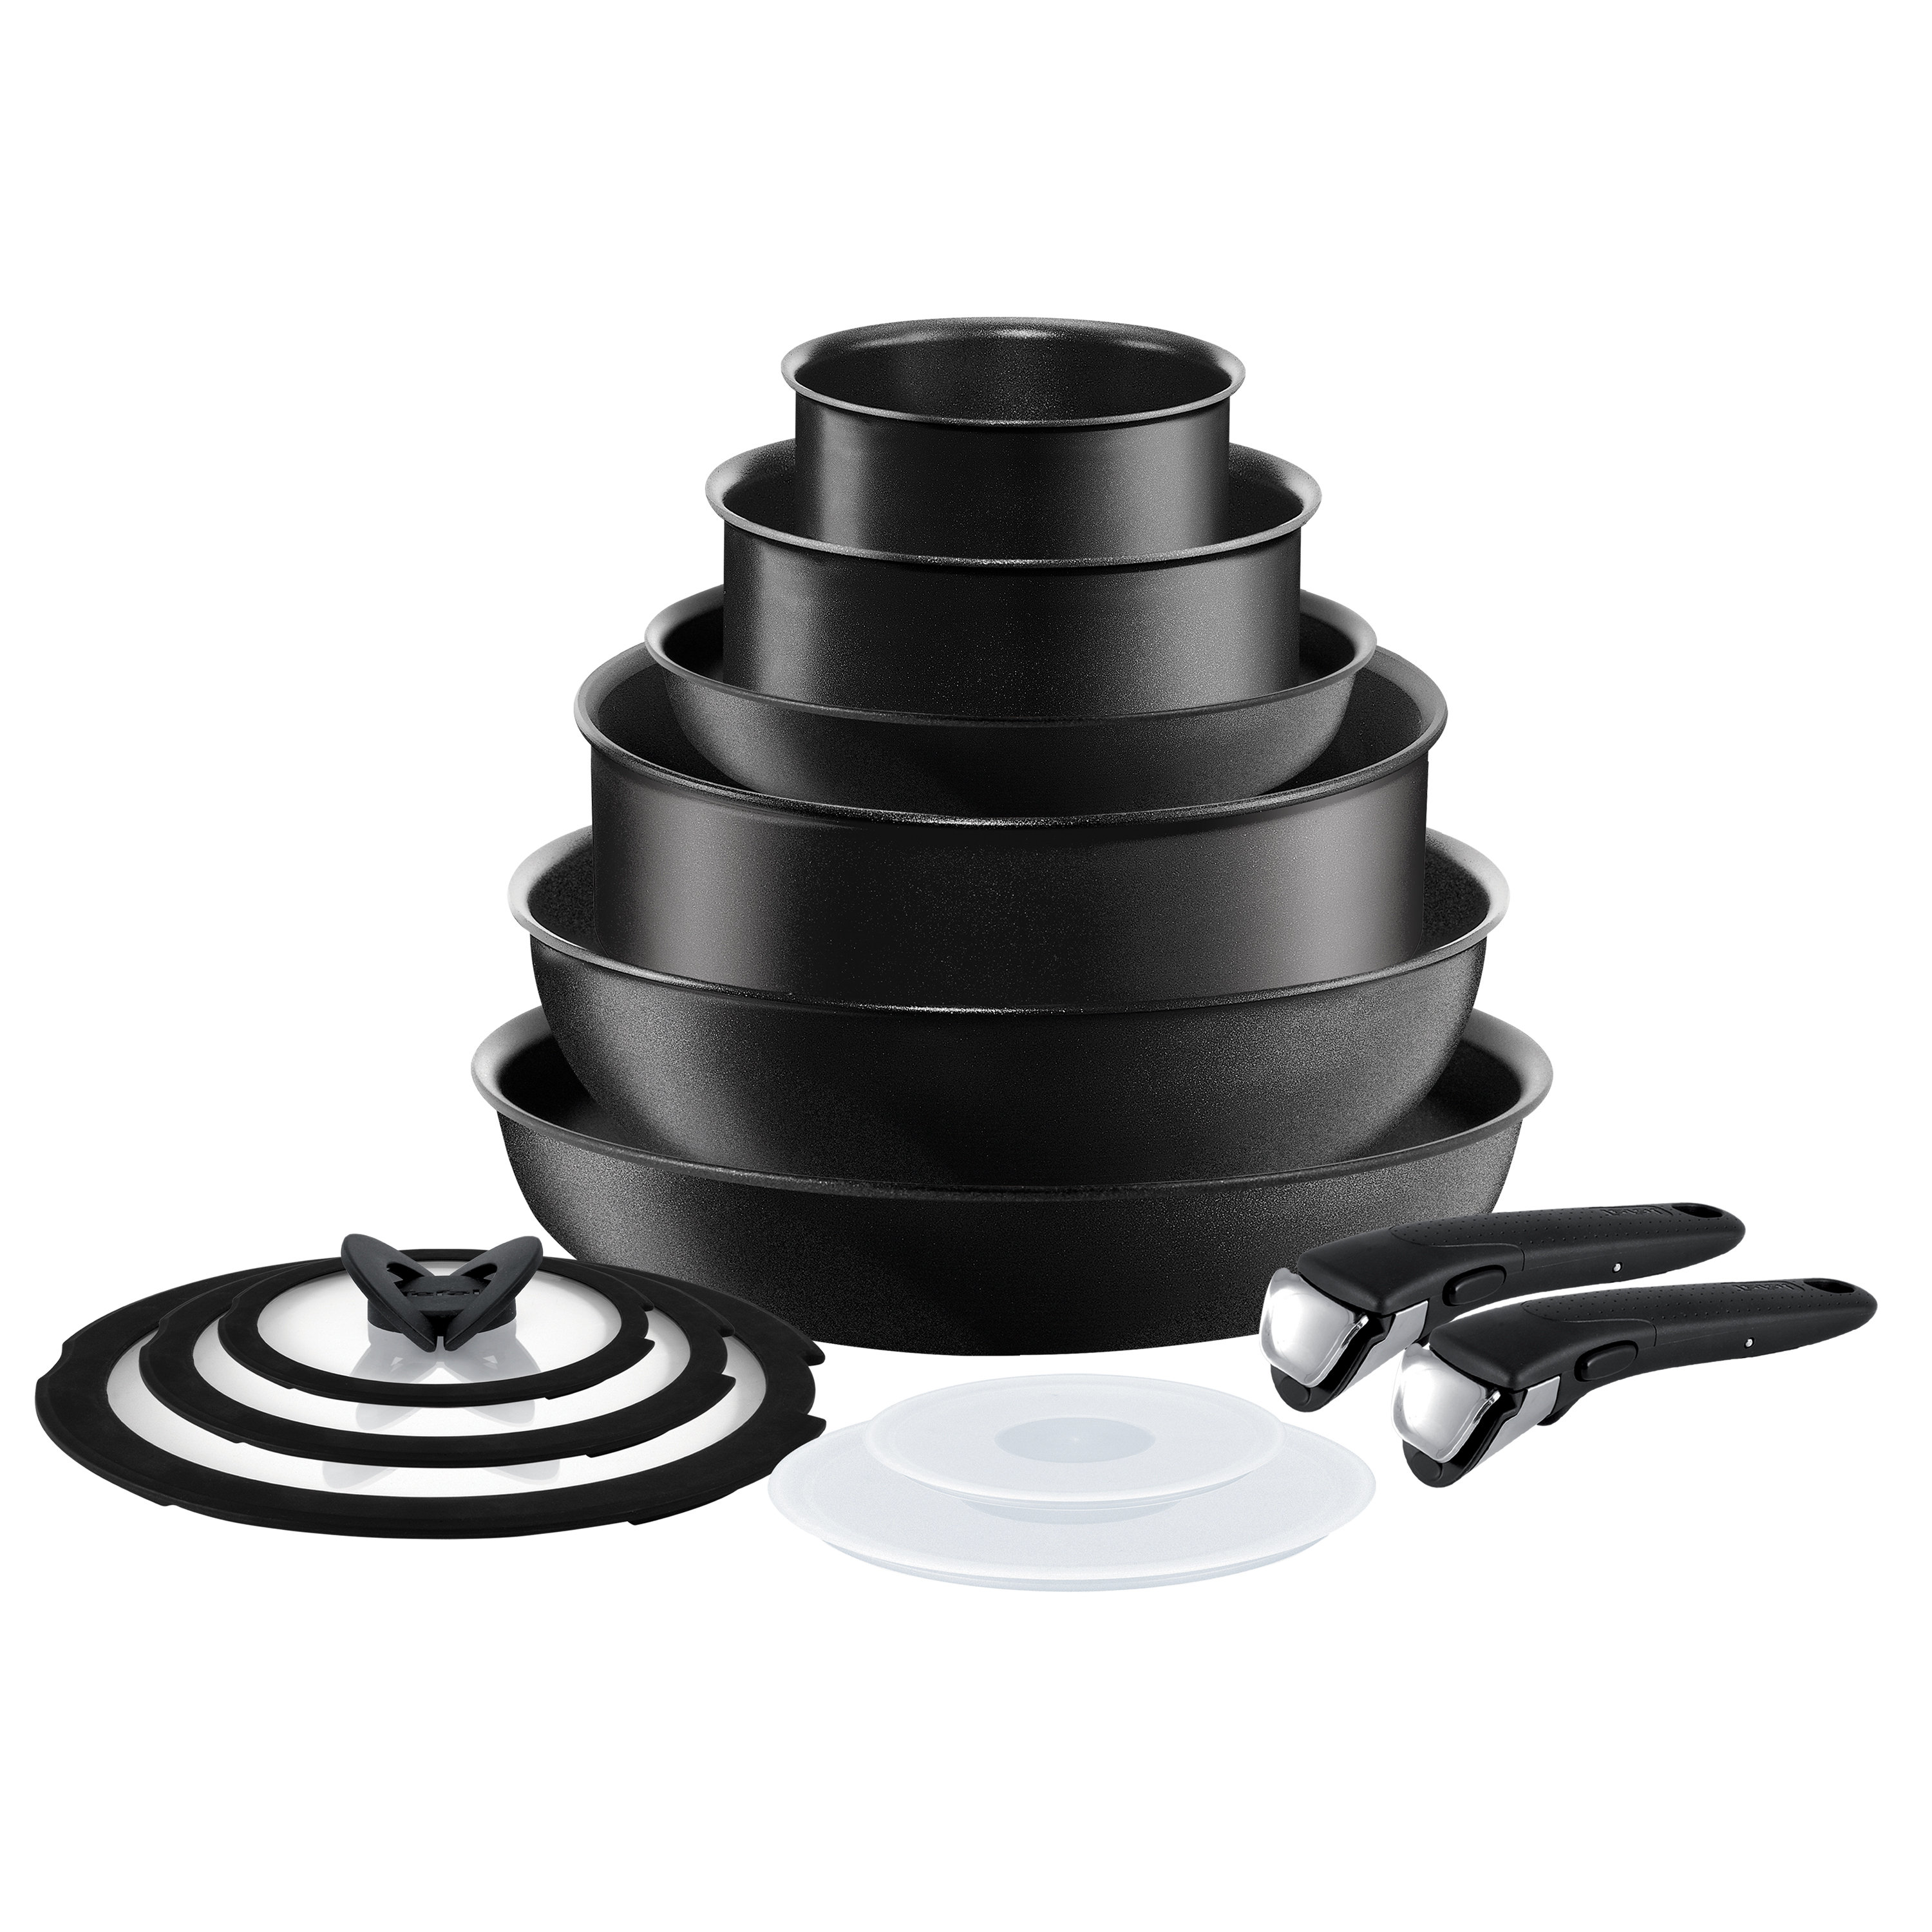 Tefal Ingenio Ultimate Induction Non-Stick 10 Piece Cookset In